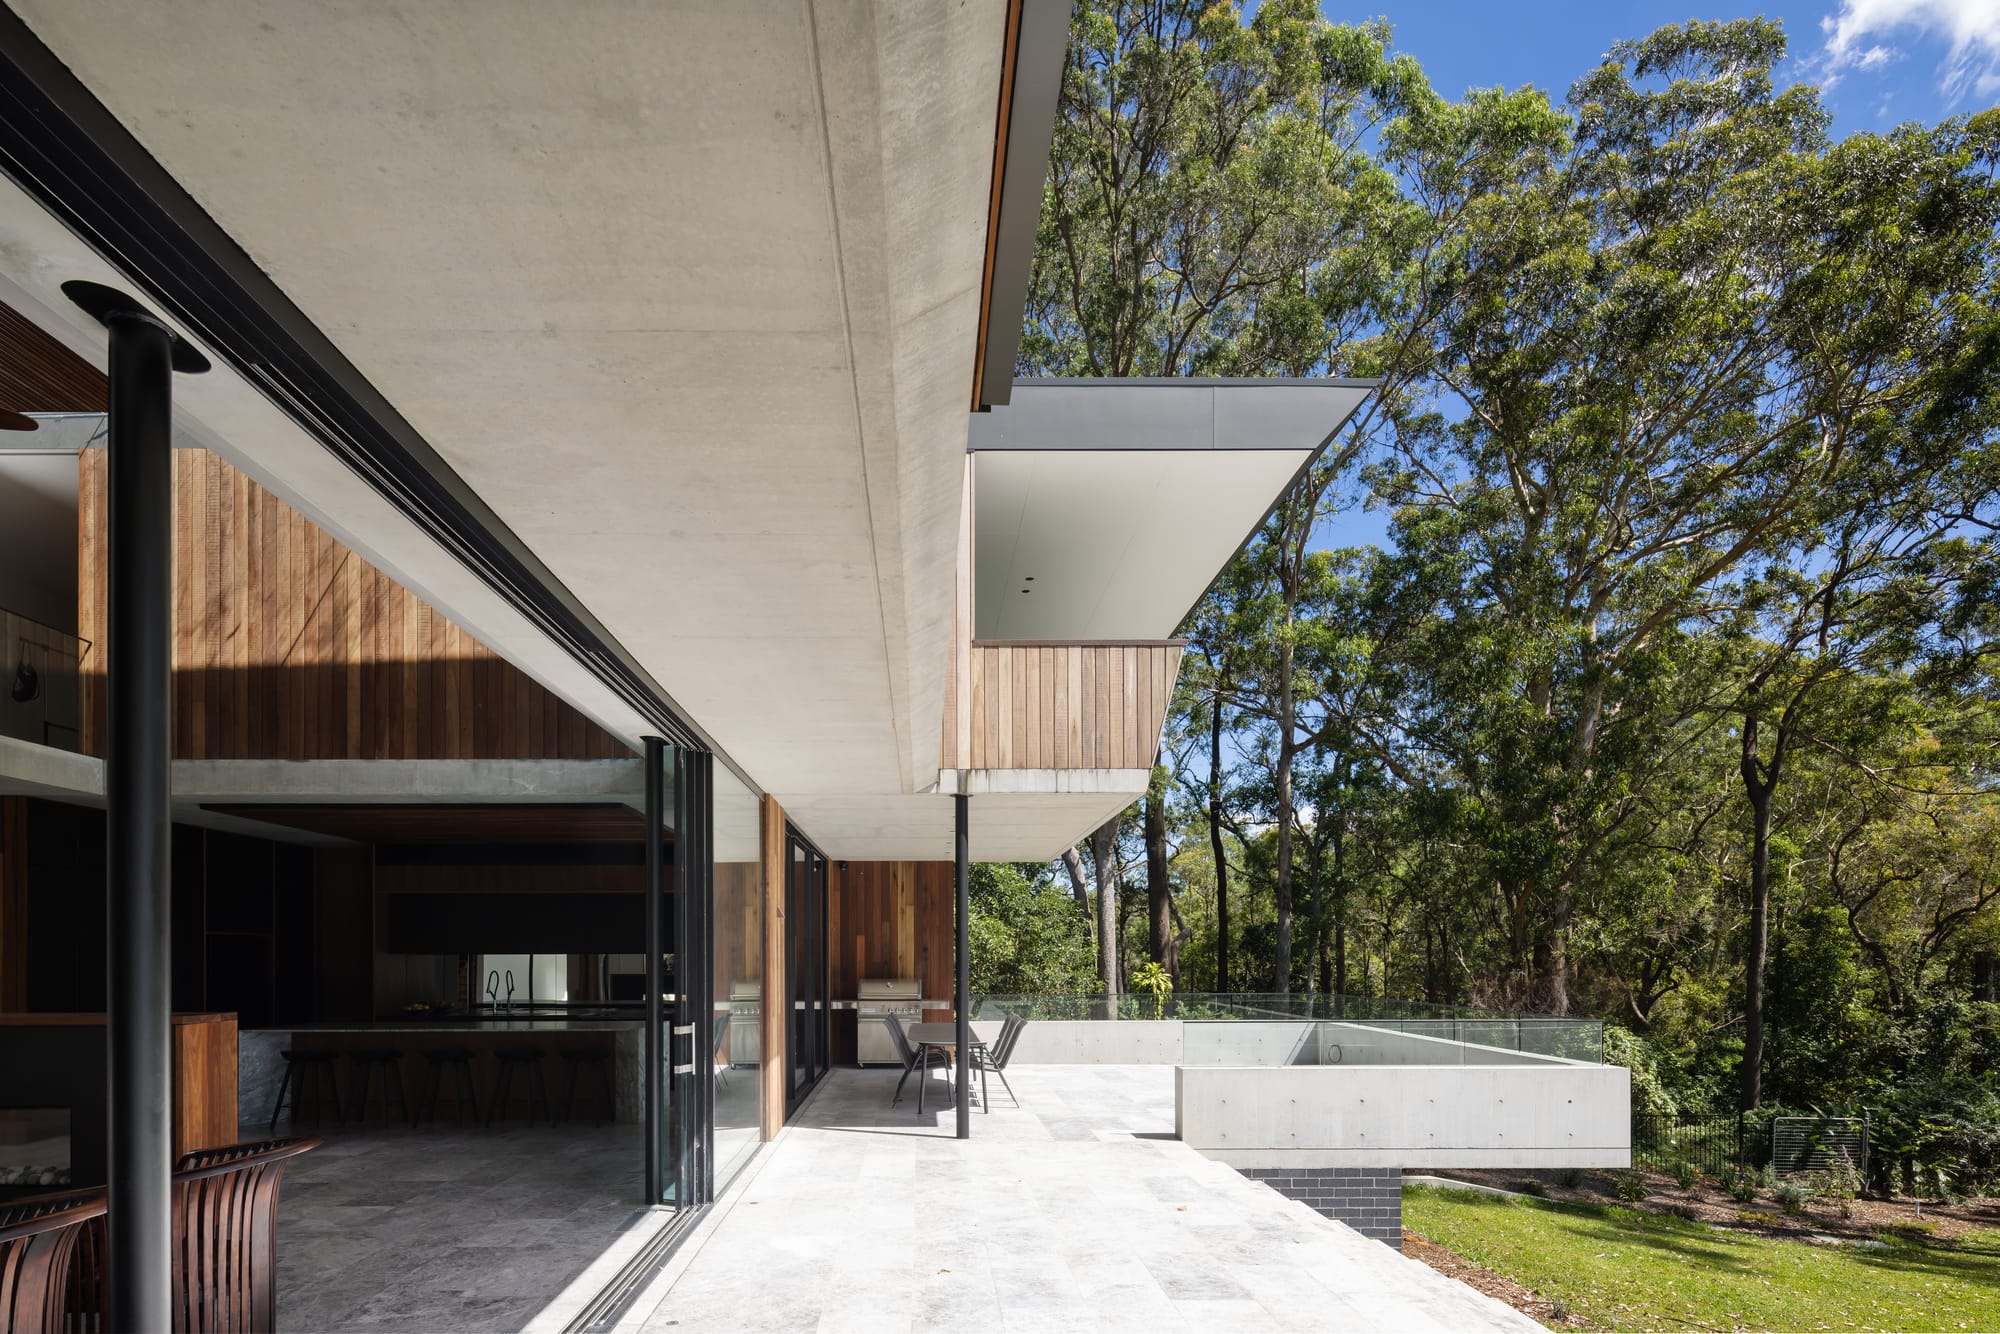 Mortlock Timbers Series: Fox Valley House. Photography by Simon Whitbread. Undercover patio running length of house with verandah outcropping. Concrete floor and ceiling. Grassy hill to right, interior living space to left. 